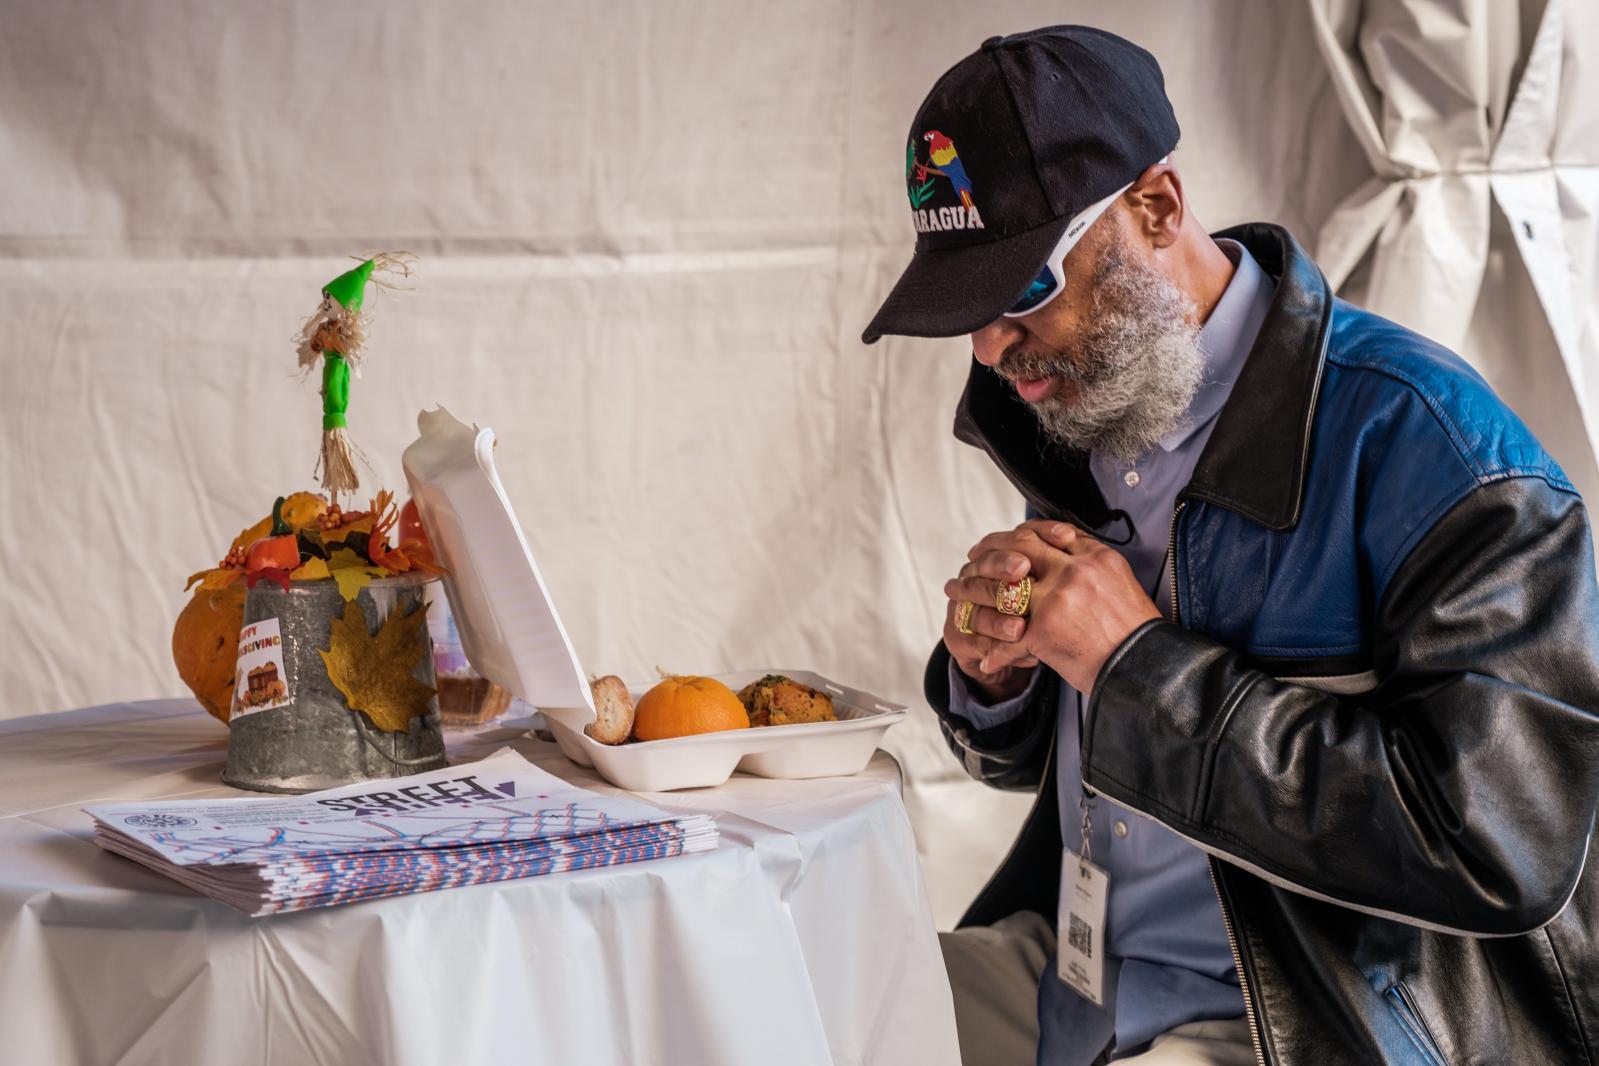 Sterling Valentine prays over his Thanksgiving meal provided by Glide in San Francisco on Thursday, November 26, 2020. Glide moved their annual Thanksgiving meal service outdoor this year because of the ongoing pandemic.